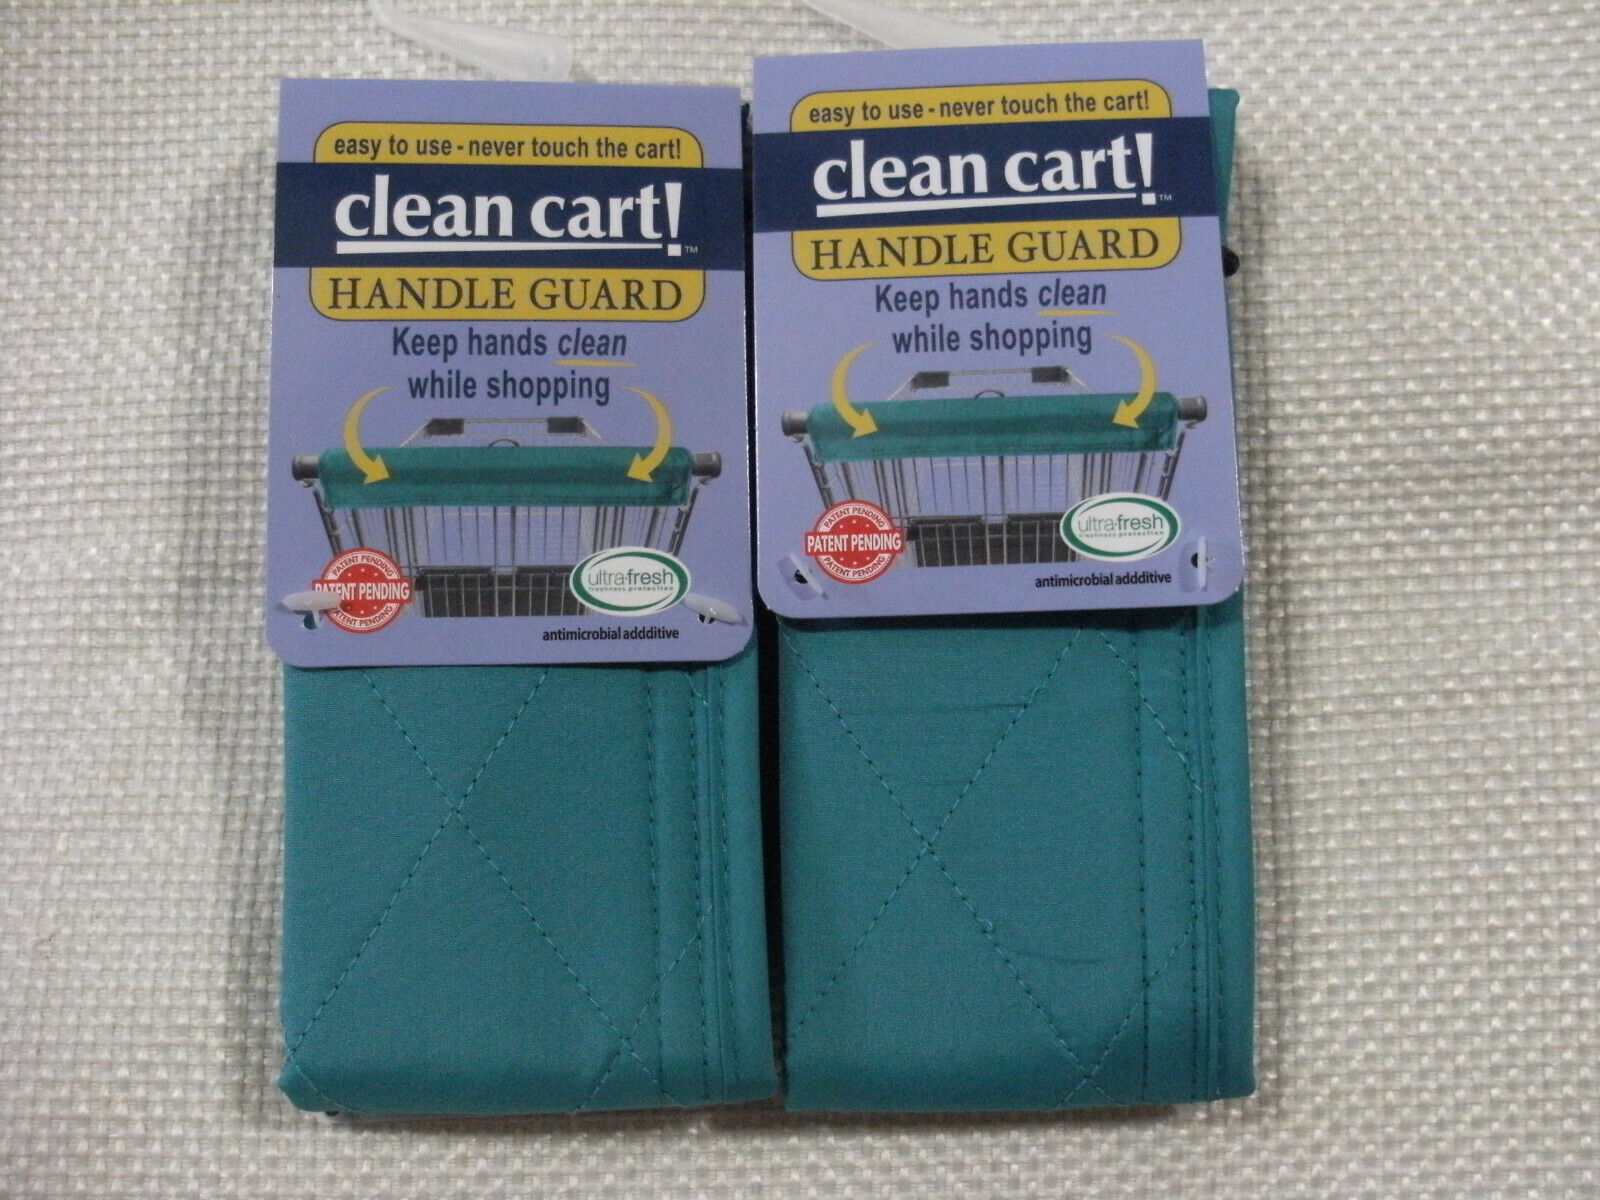 (2) TEAL Clean Shopping Cart Handle Guard Reusable Cover Sanitary Washable Wipe Clean Cart MAN-789-XX-TEAL-E4